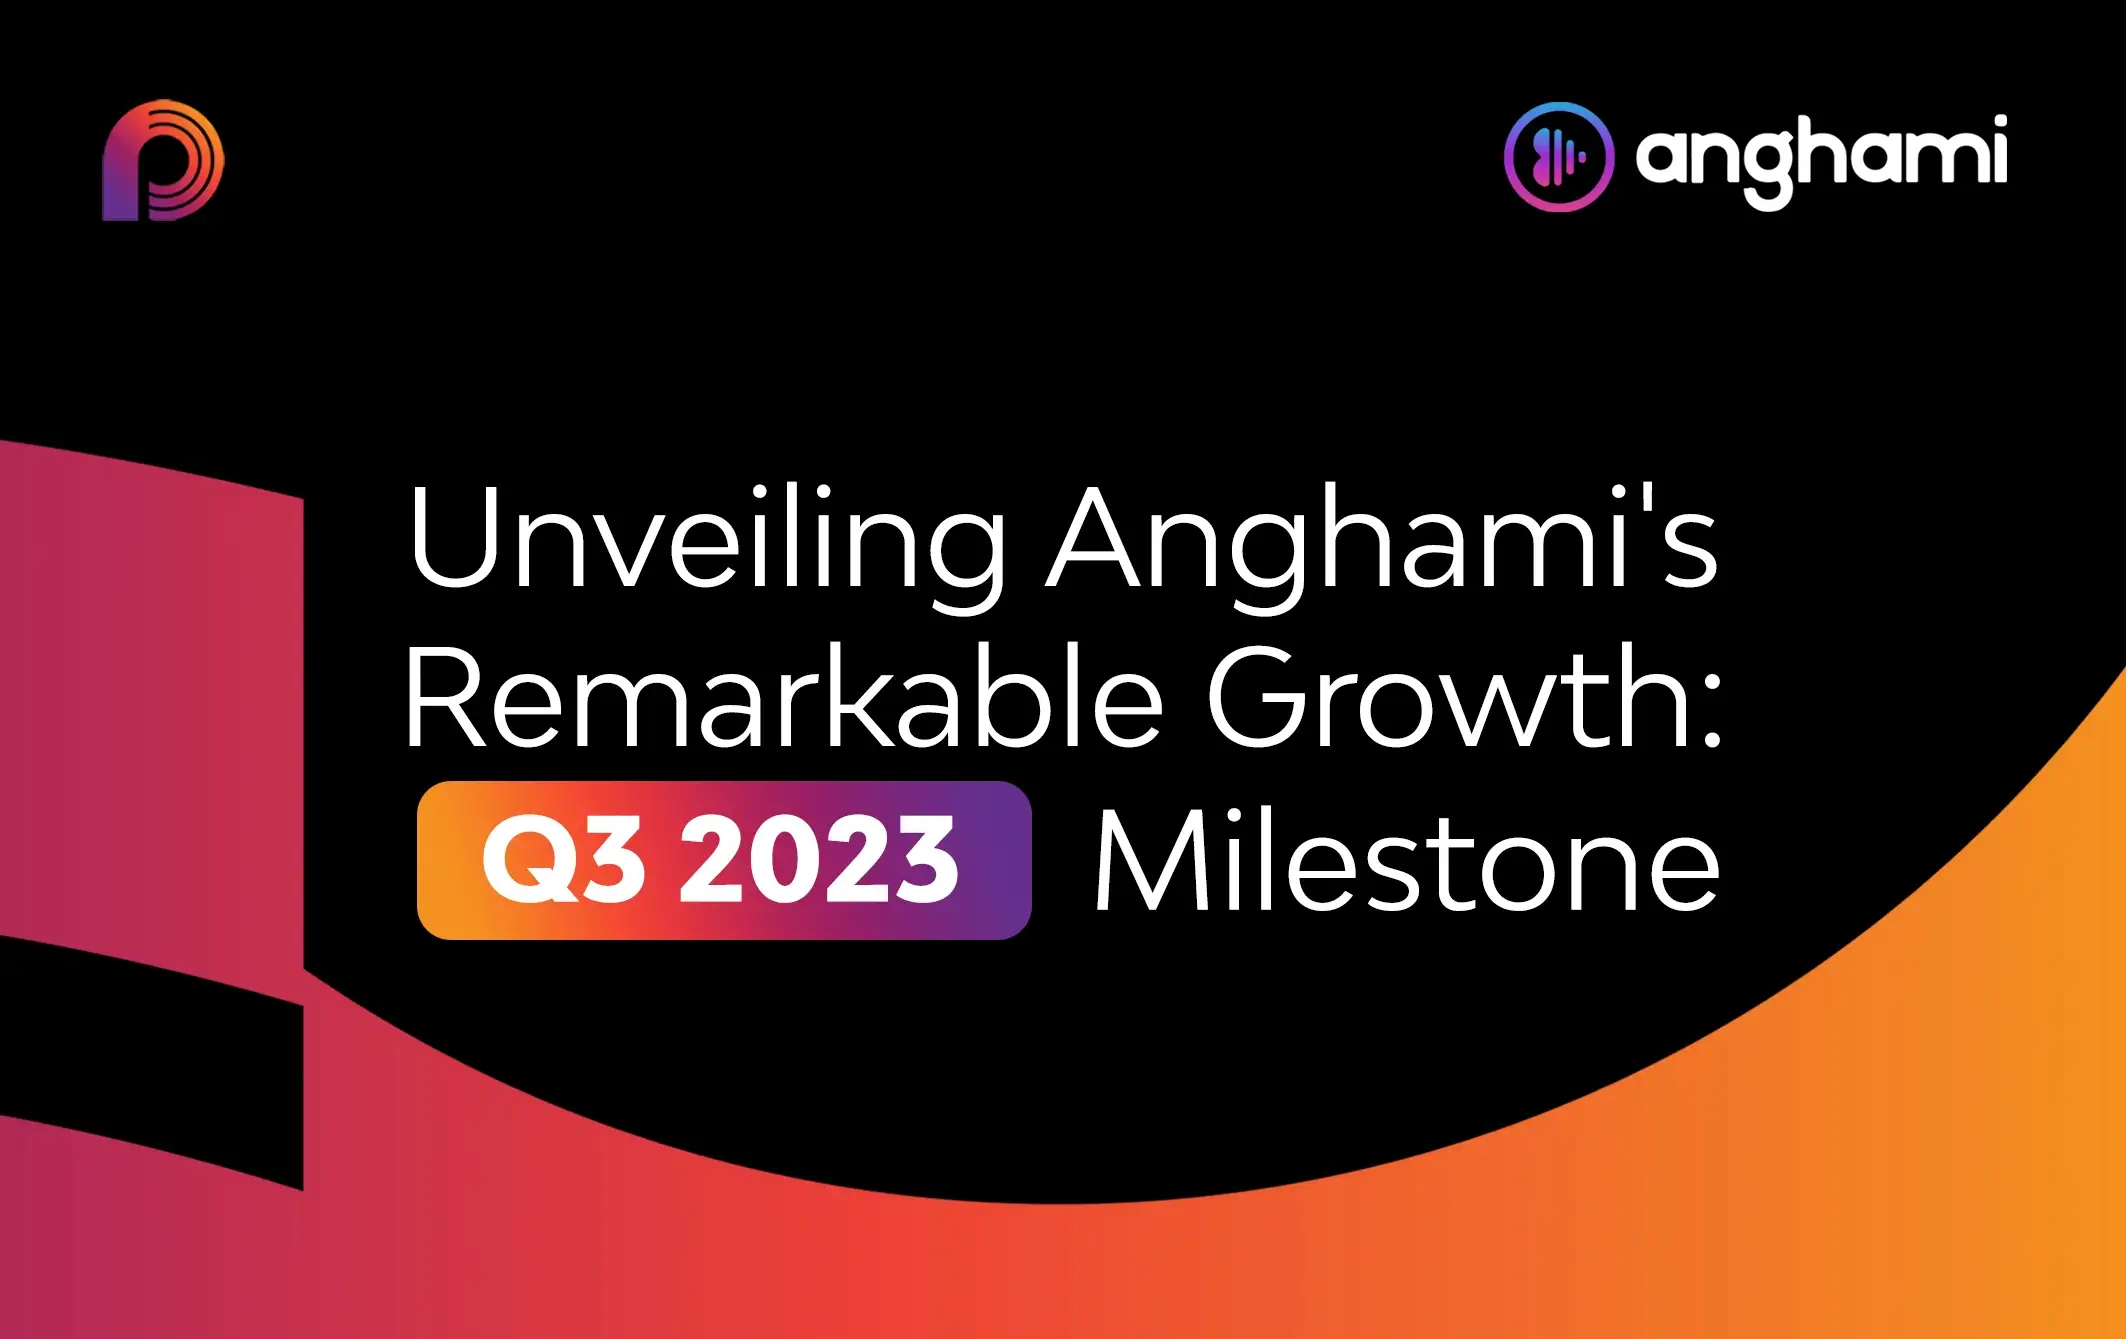 Anghami Remarkable Growth